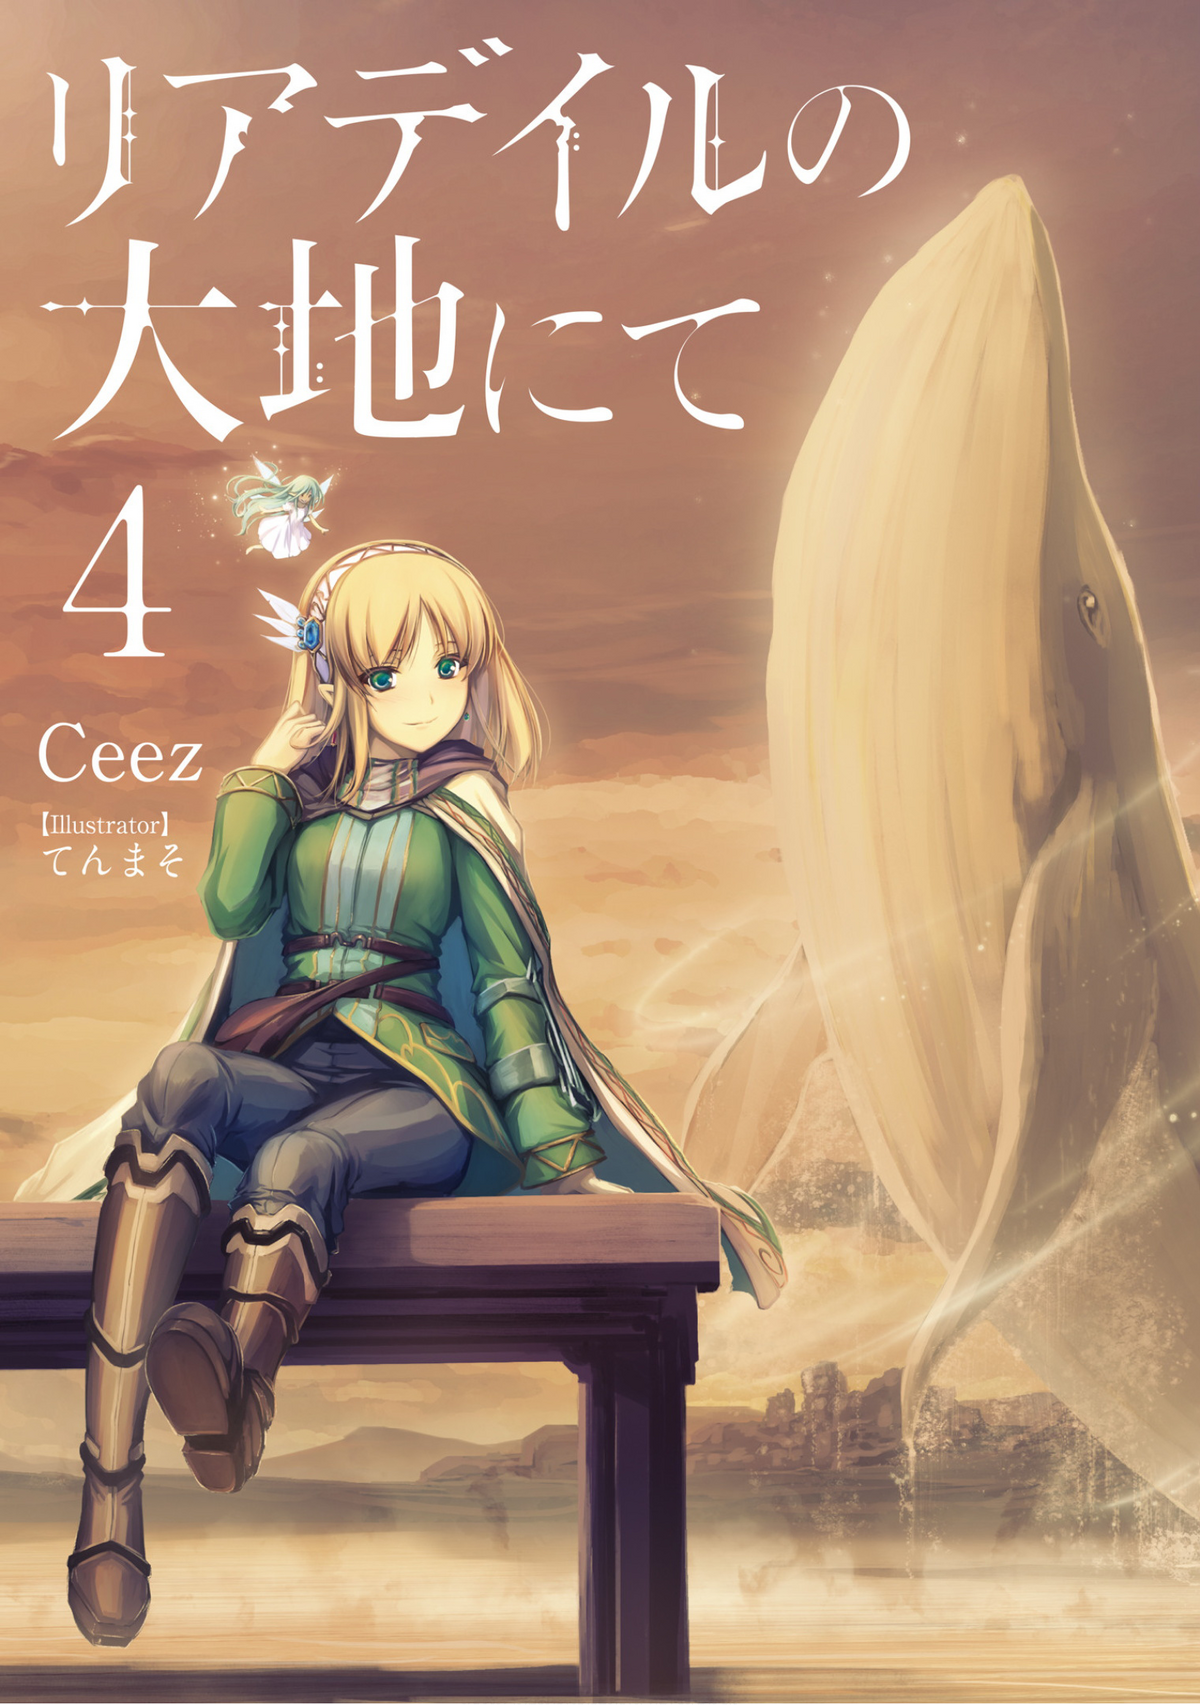 In the Land of Leadale, Vol. 6 (light novel) eBook by Ceez - EPUB Book